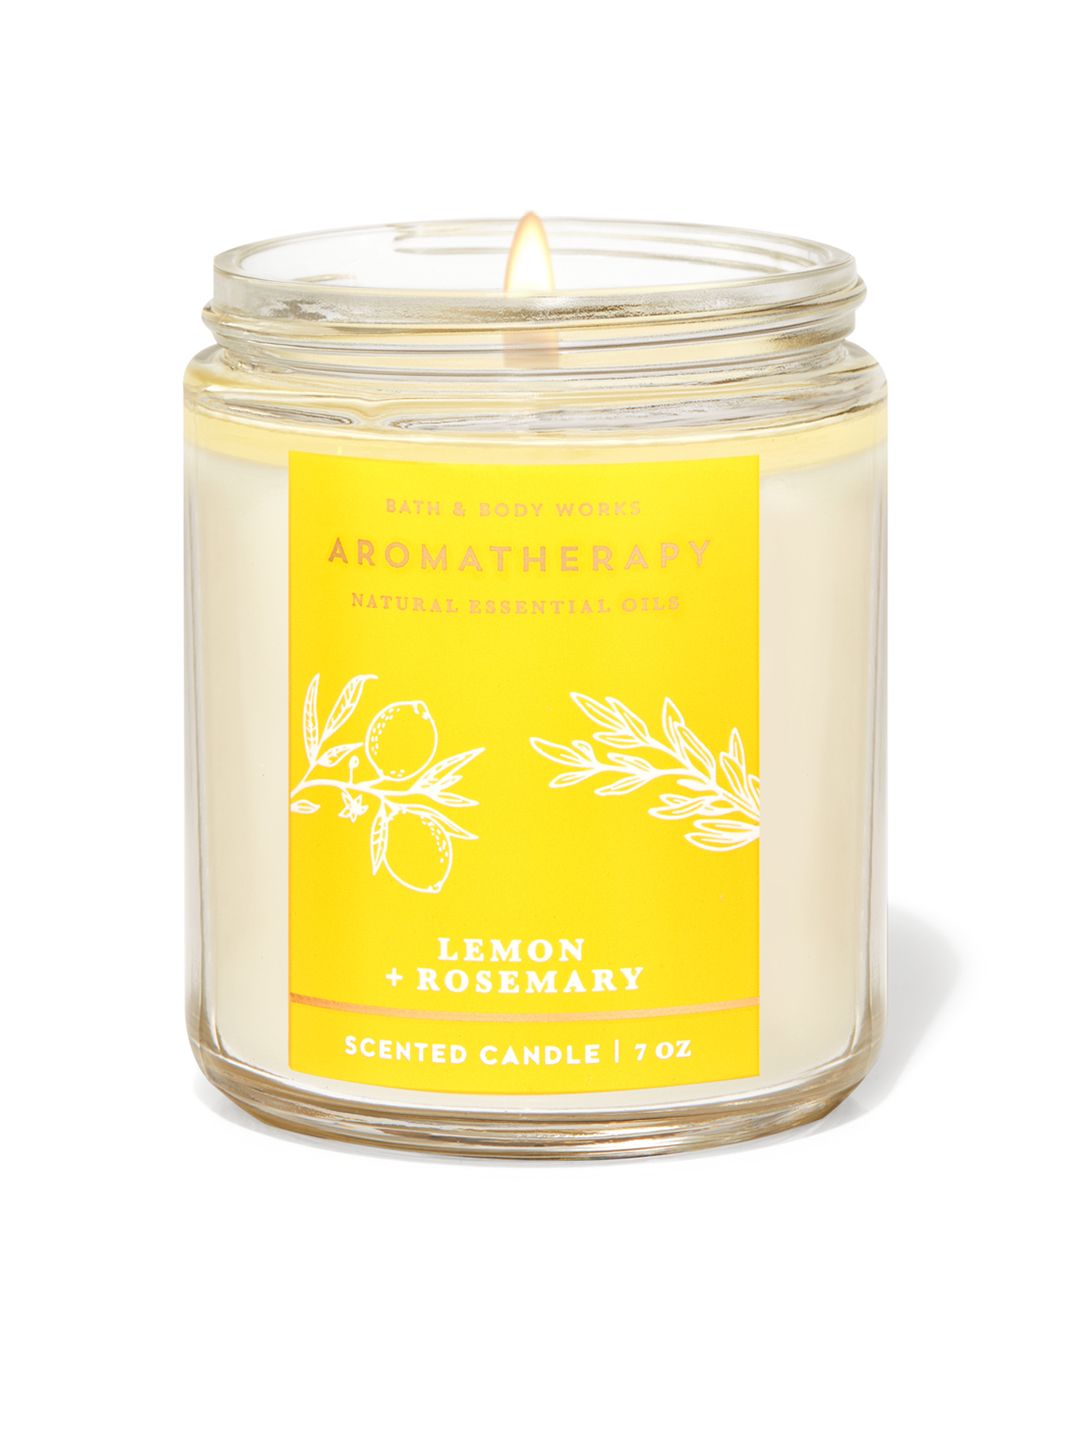 Bath & Body Works Aromatherapy Lemon Rosemary Single Wick Candle - 198 g Price in India